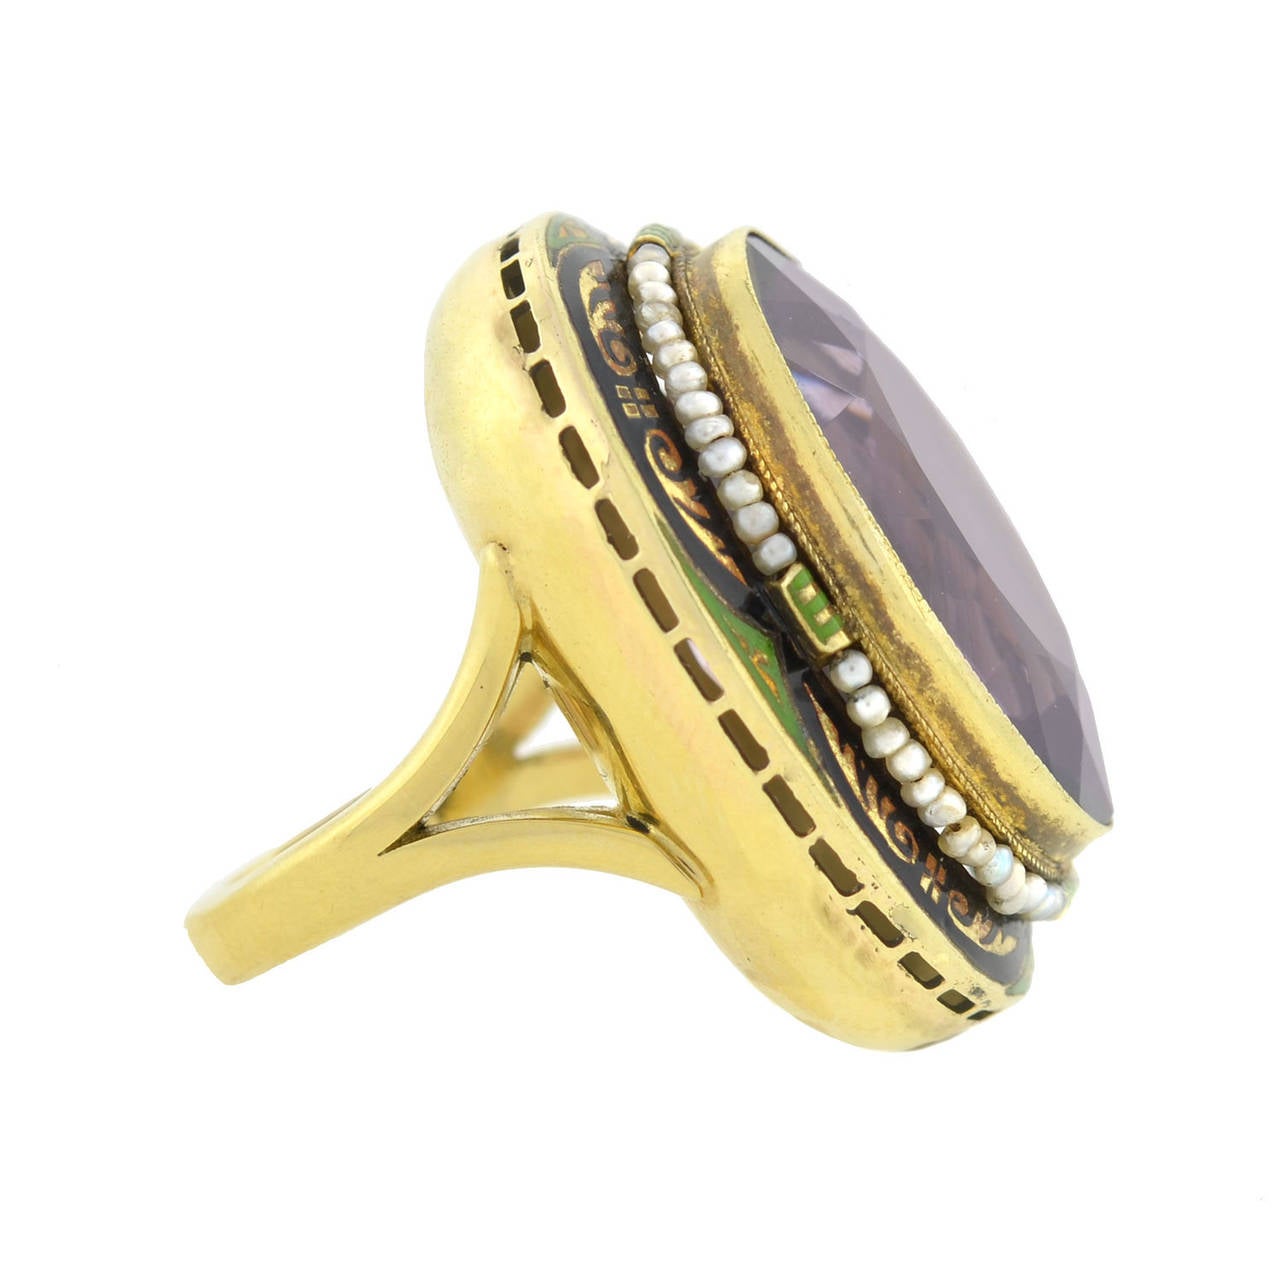 An exquisite amethyst ring from the Art Deco (ca1920) era! Made of 14kt yellow gold, this fabulous piece holds a large, faceted, oval shaped amethyst stone at its center. The bezel set stone has a faceted face and back and exhibits a vibrant, purple